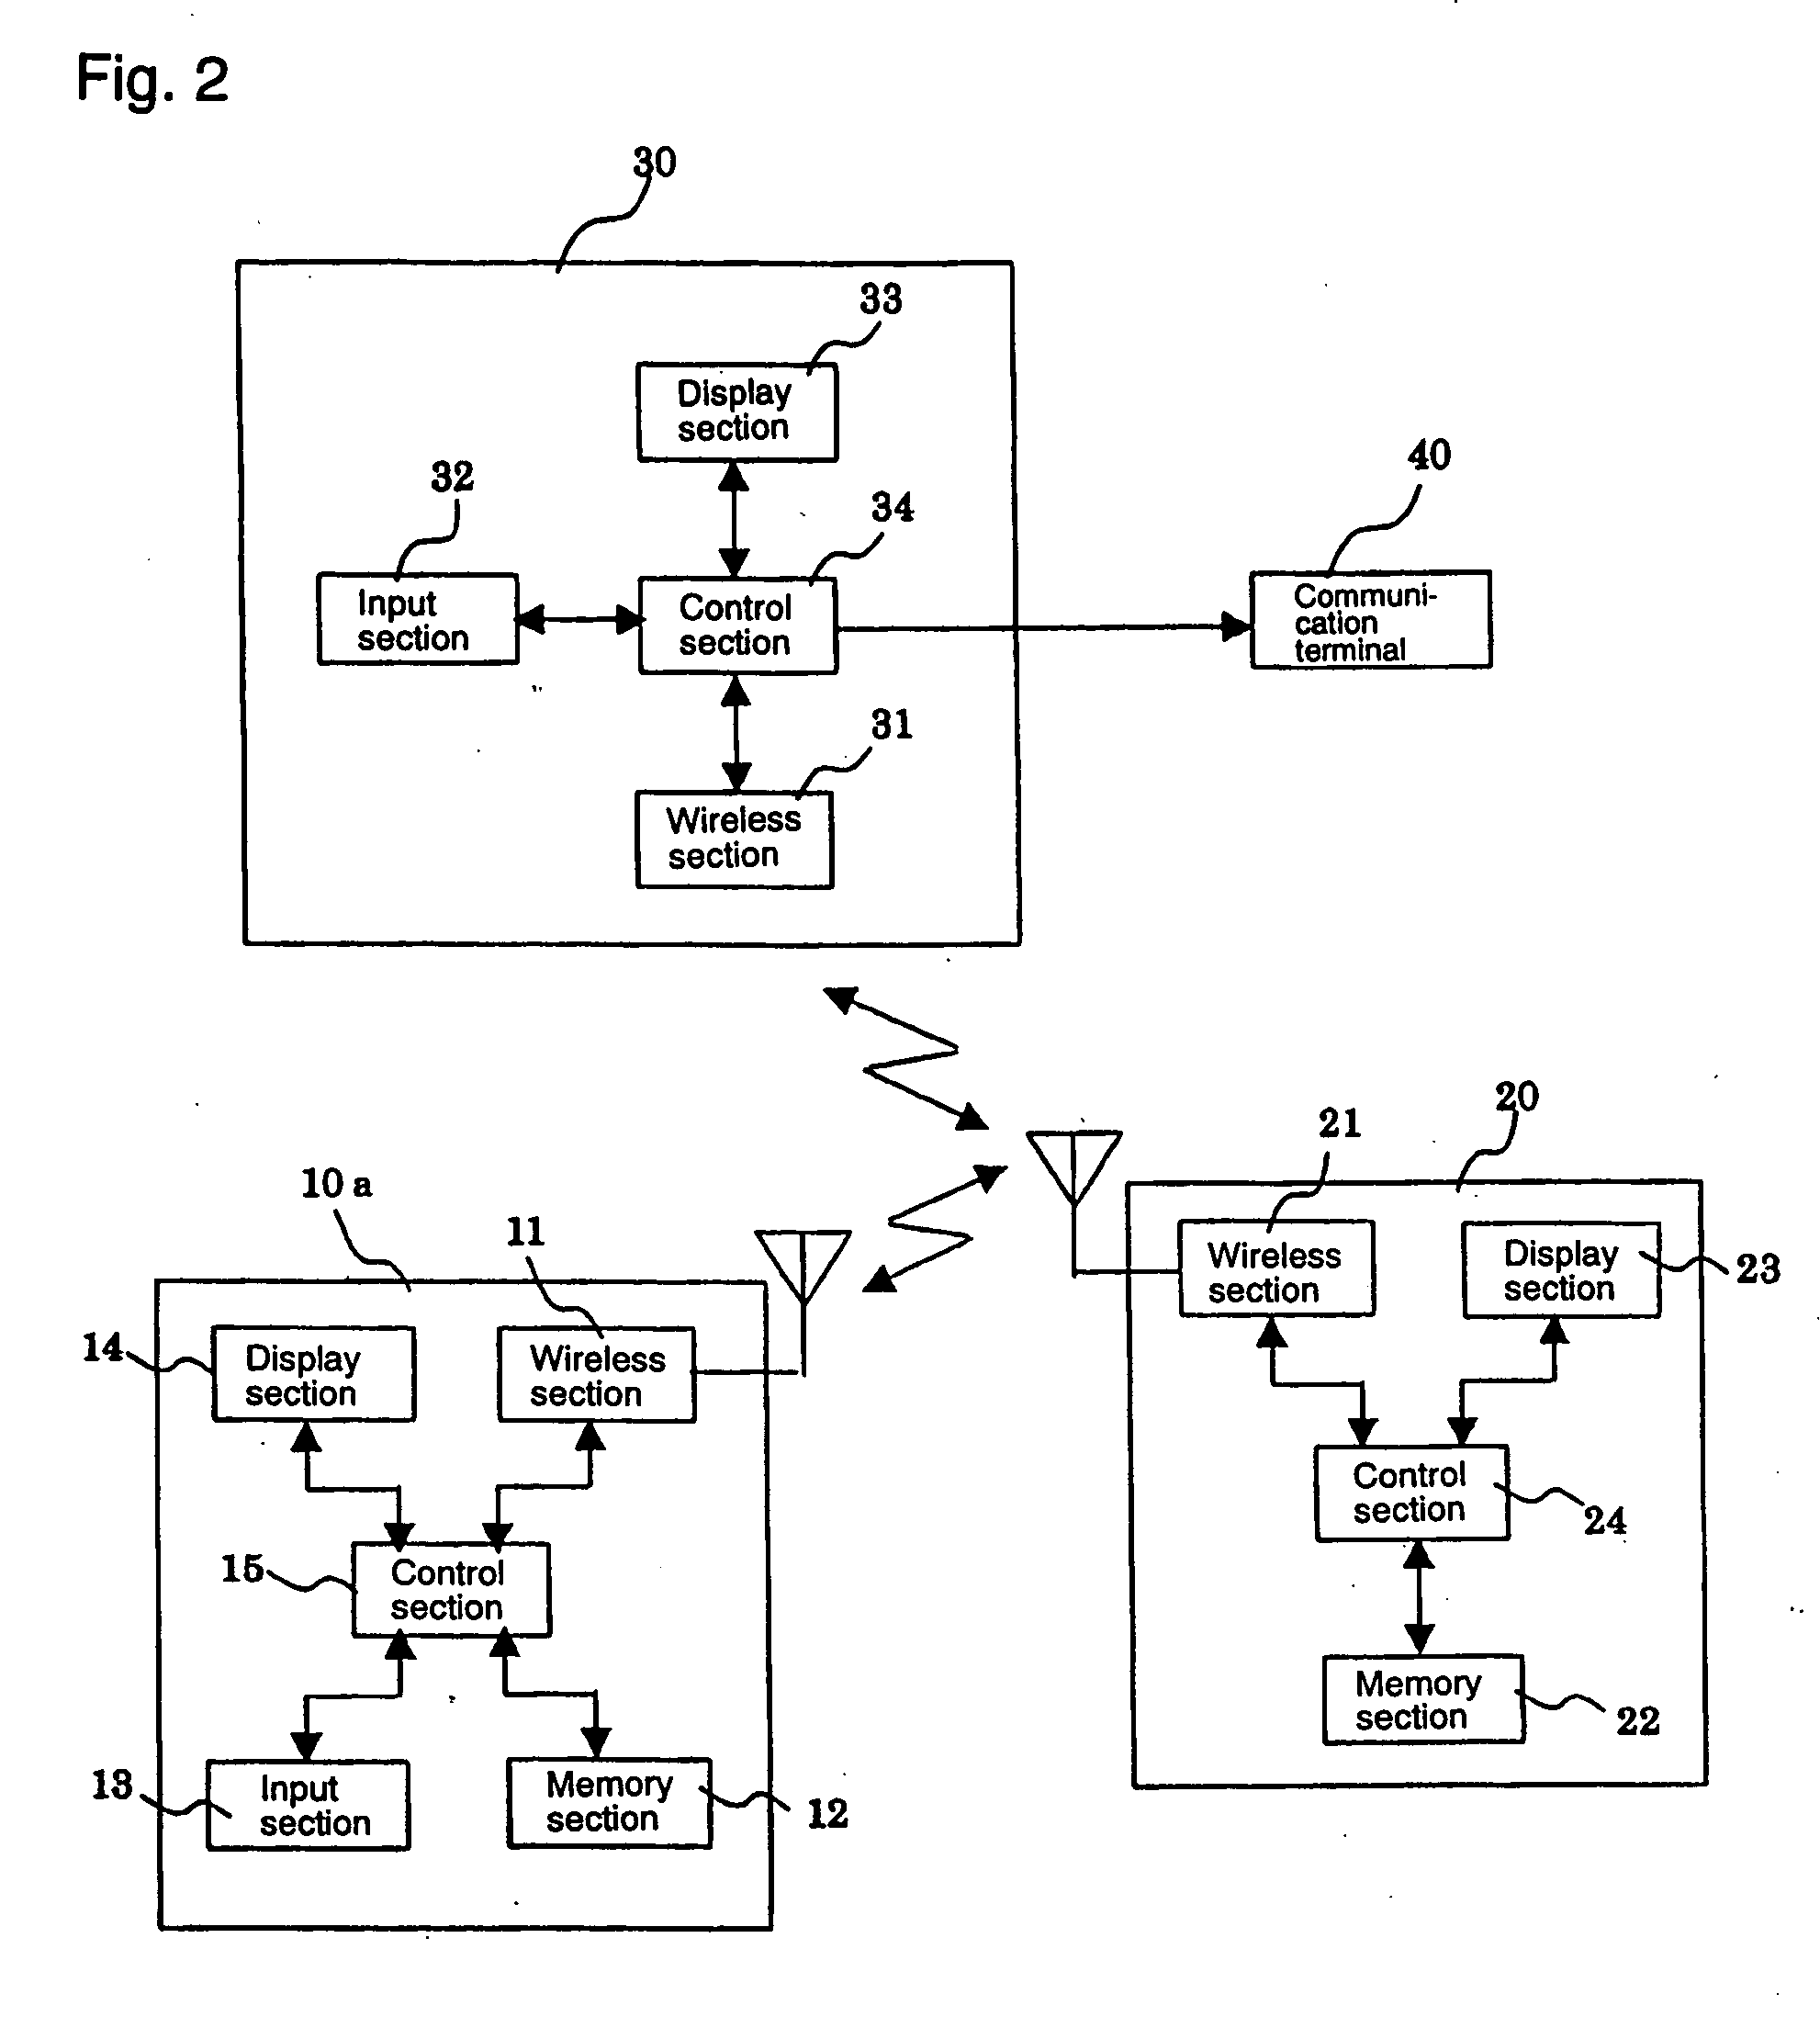 System and method for storing and managing personal information